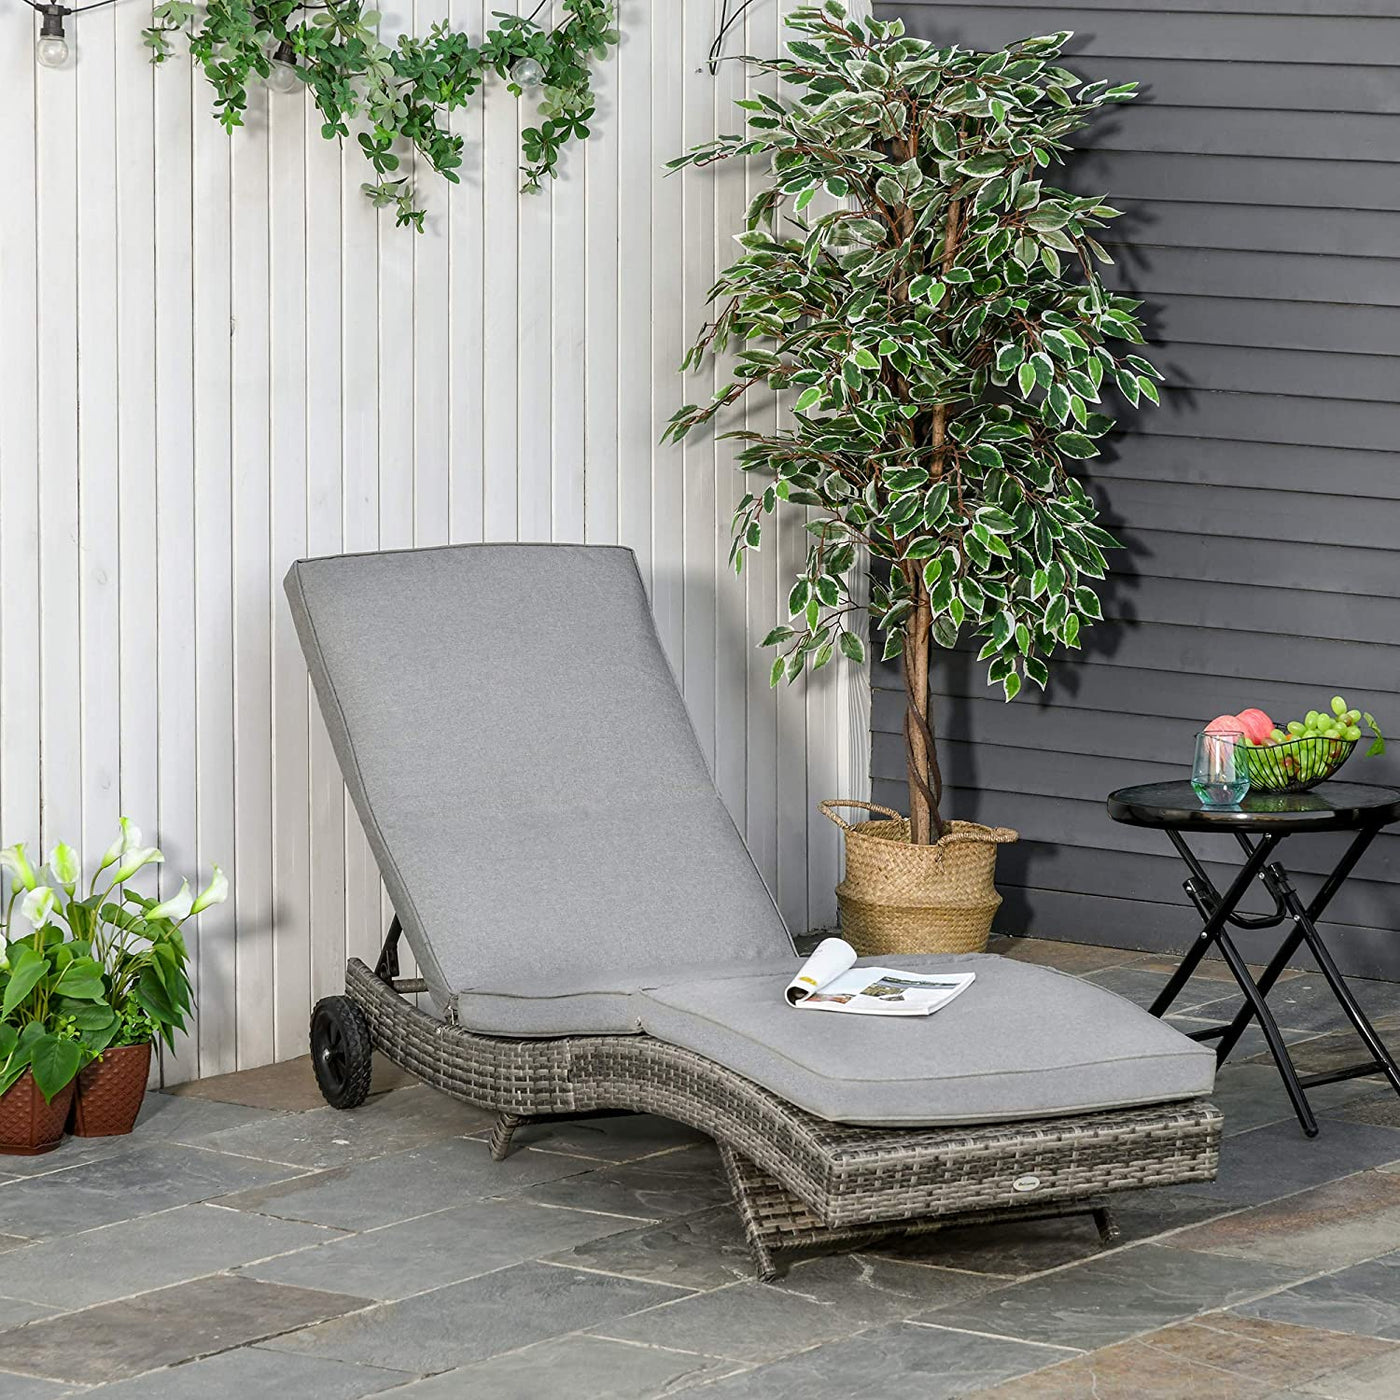 Outsunny Rattan Outdoor Chaise Lounge Chair with Grey Cushions - $95